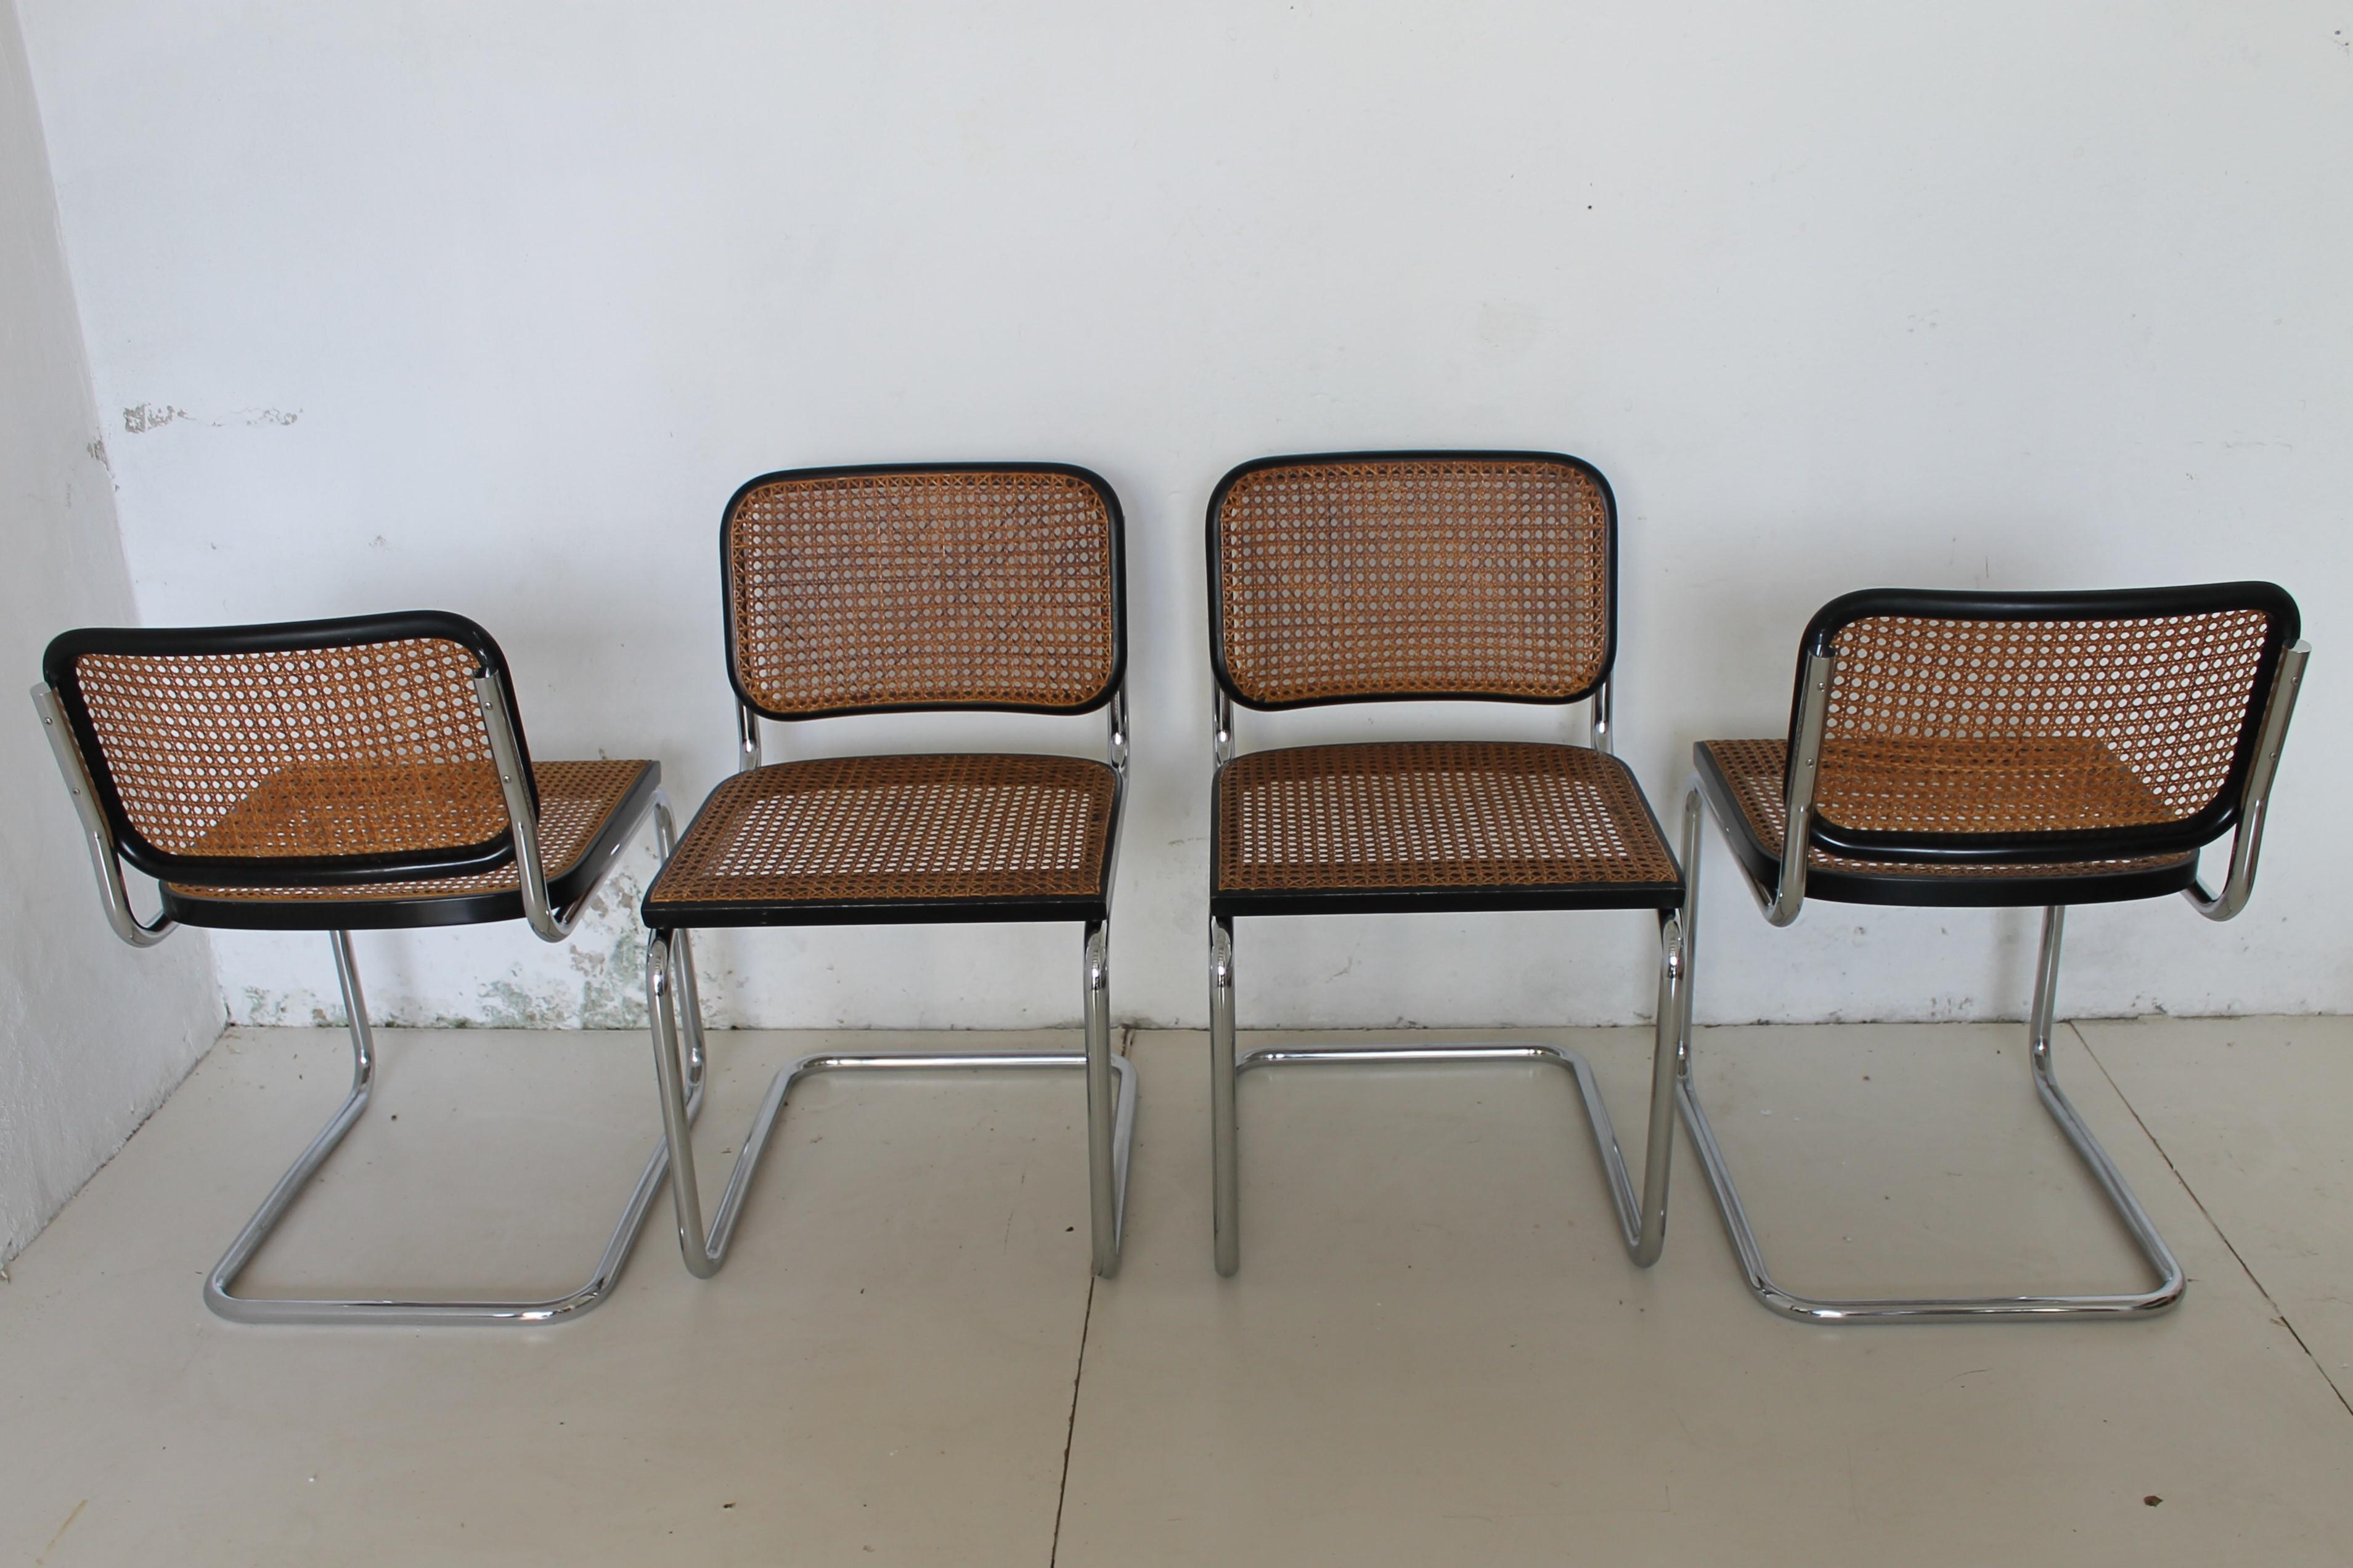 Four Cesca chairs designed by Marcel Breuer for Gavina dated circa 1965 (the project was created in 1928).

This first serie is hand sewn straw thread for thread

One with new seat 